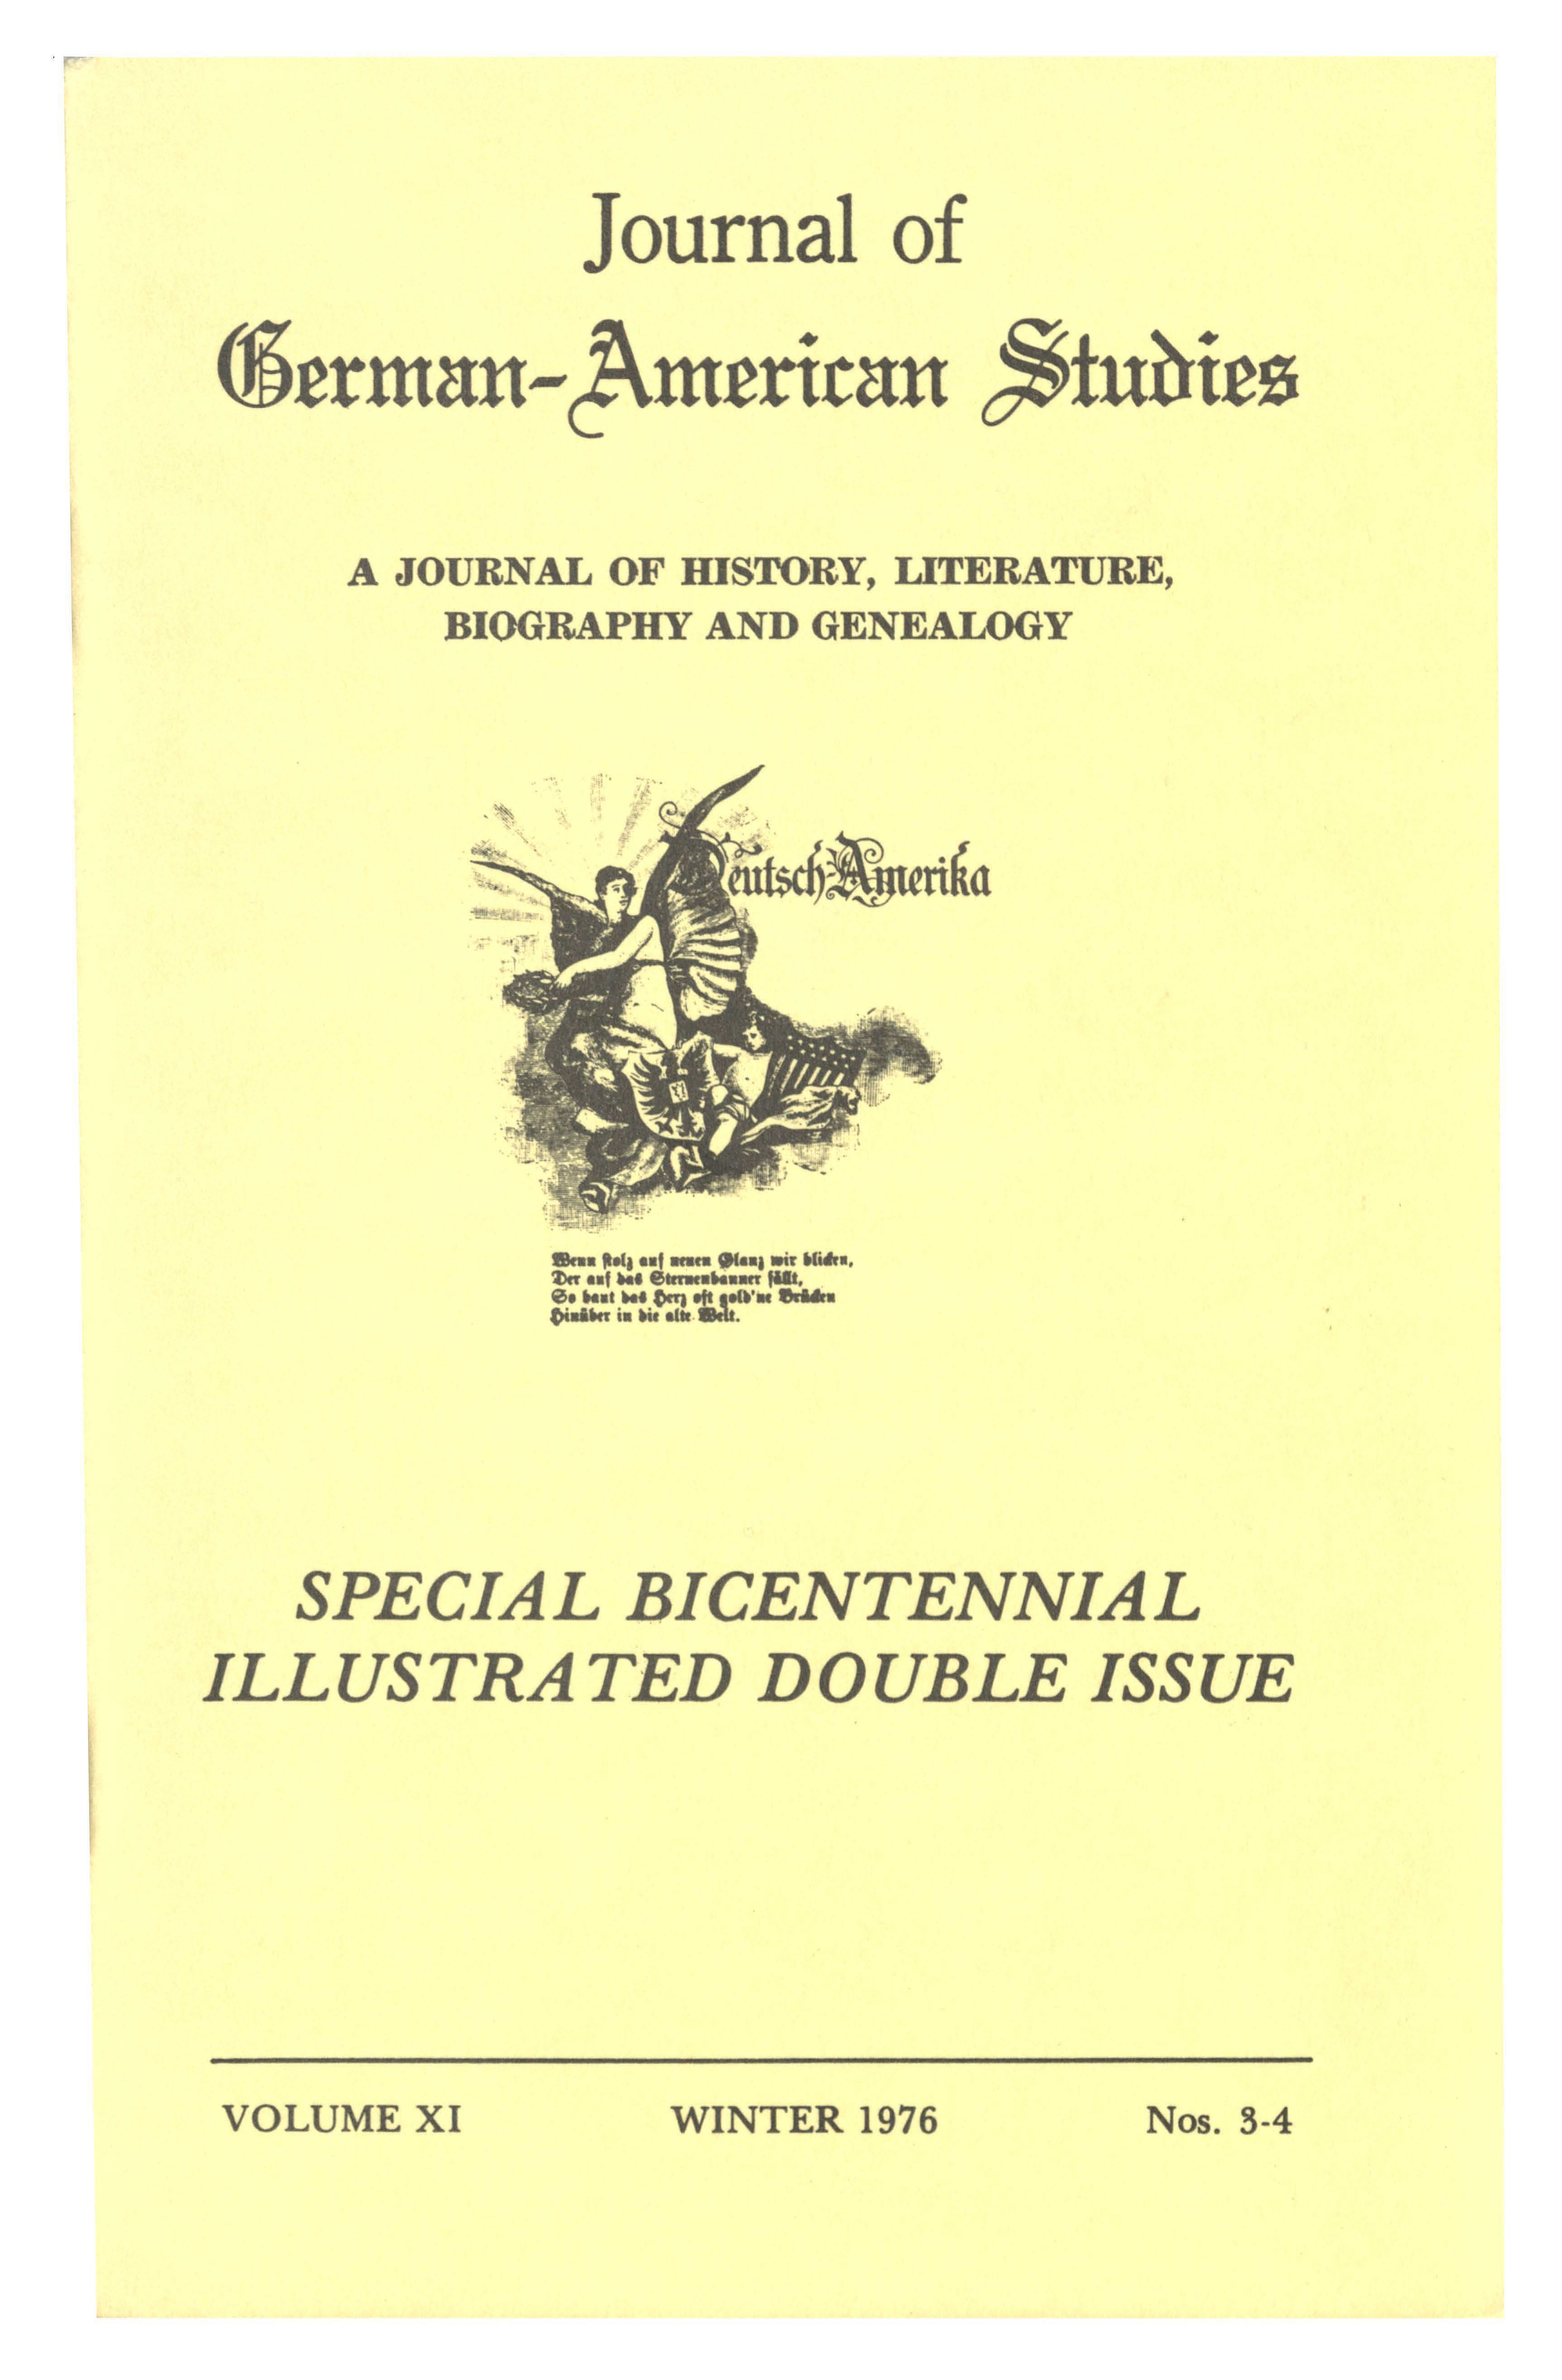 Cover of JGAS 11:3-4 in yellow with Special Bicentennial Illustrated Double Issue printed on cover